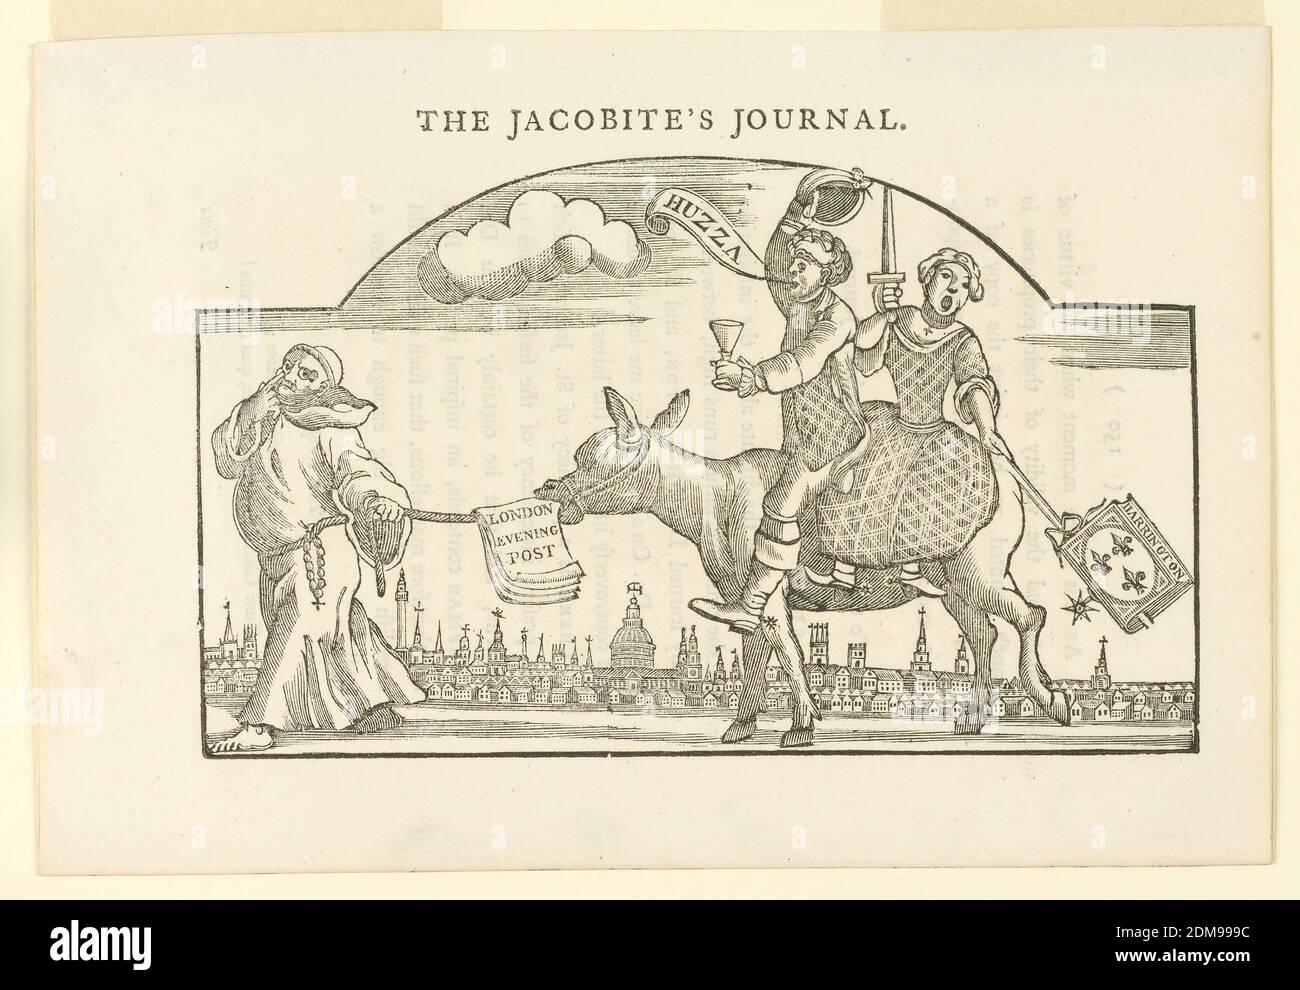 The Jacobite's Journal, Samuel Ireland, English, ca. 1744–1800, William Hogarth, English, 1697 - 1764, Woodcut on paper, With an arched upper part. A donkey led by a monk carries a man and a woman. The man holds a wine glass in his left hand, raises his hat with his right hand and shouts 'Huzza'; the woman holds a sword and a pack of cards marked 'Harrington'. In background, silhouette of London. Illustration for Ireland, 'Graphic Illustrations…' I, 149., England, 1794, Print Stock Photo